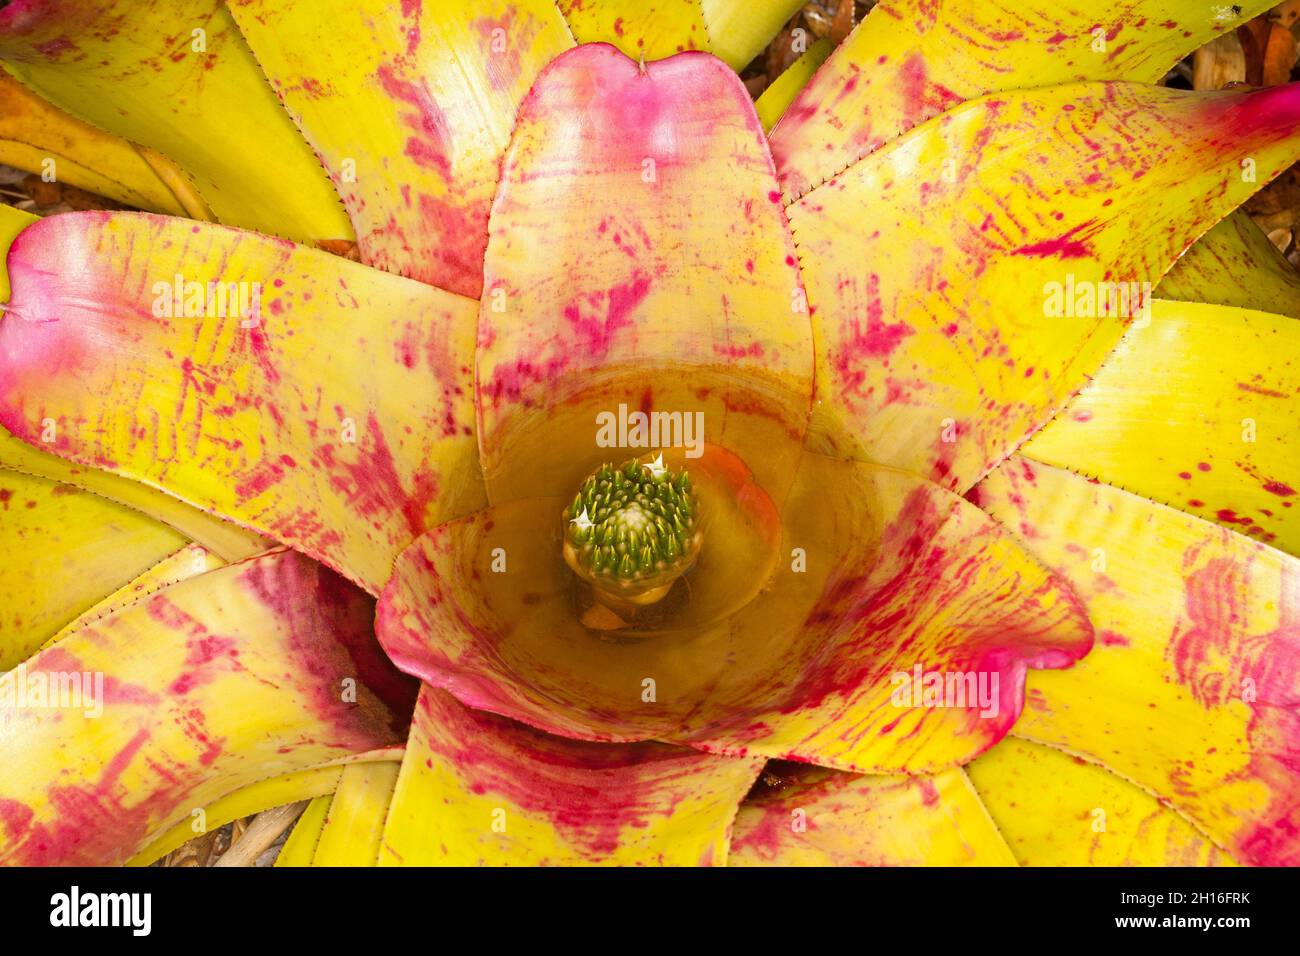 Close-up of colourful red and yellow foliage of Bromeliad, Neoregelia De Rolf, with flowers submerged in central 'vase' of water, in Australia Stock Photo